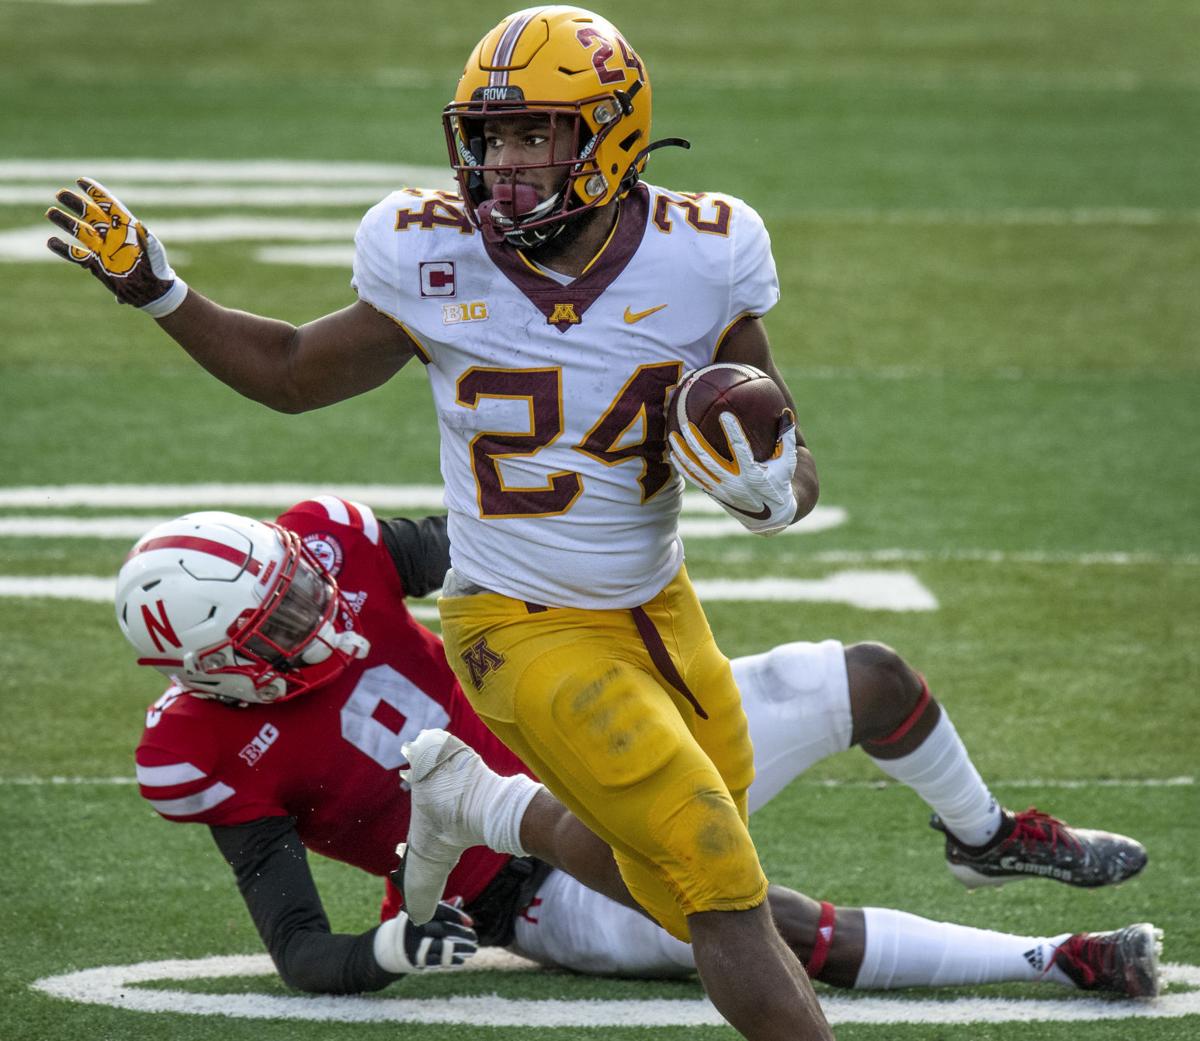 From gophers to gold cleats: 9 standout college football uniforms